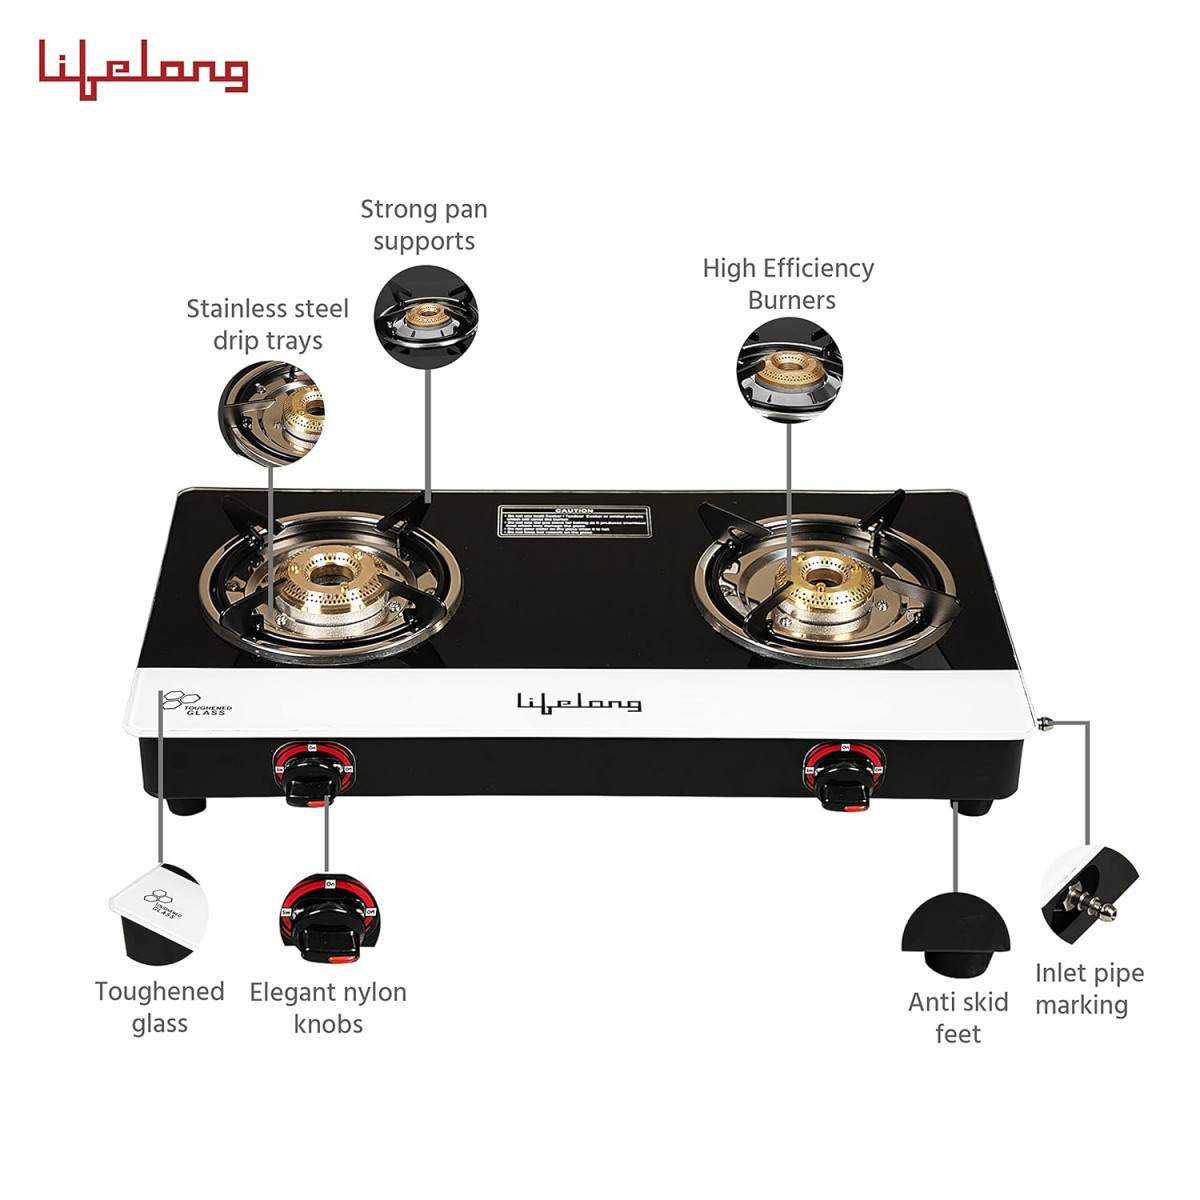 Lifelong Glass Top 2 Burner Gas Stove  Premium Design Brass Burner Toughened Glass High Thermal EfficiancyManual Black and White LLGS211 ISI Certified